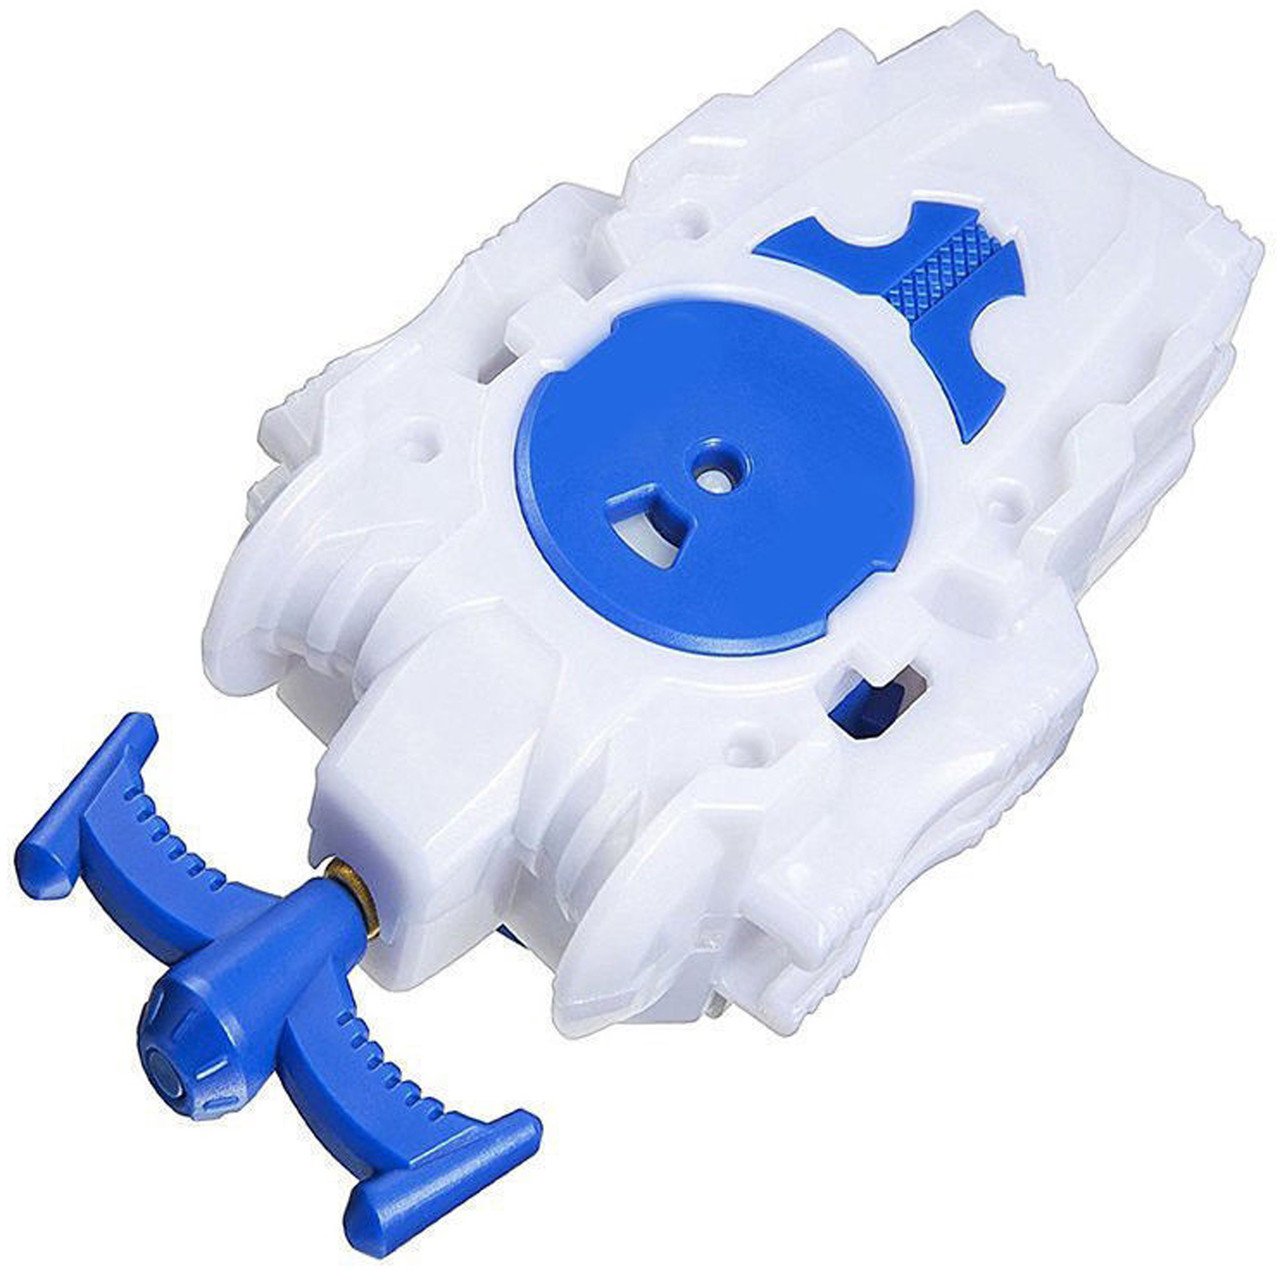 NEW BEYBLADE SPINNING WIRE LAUNCHER/LAUNCHER ░▓██▄▄▄▄▄▓░